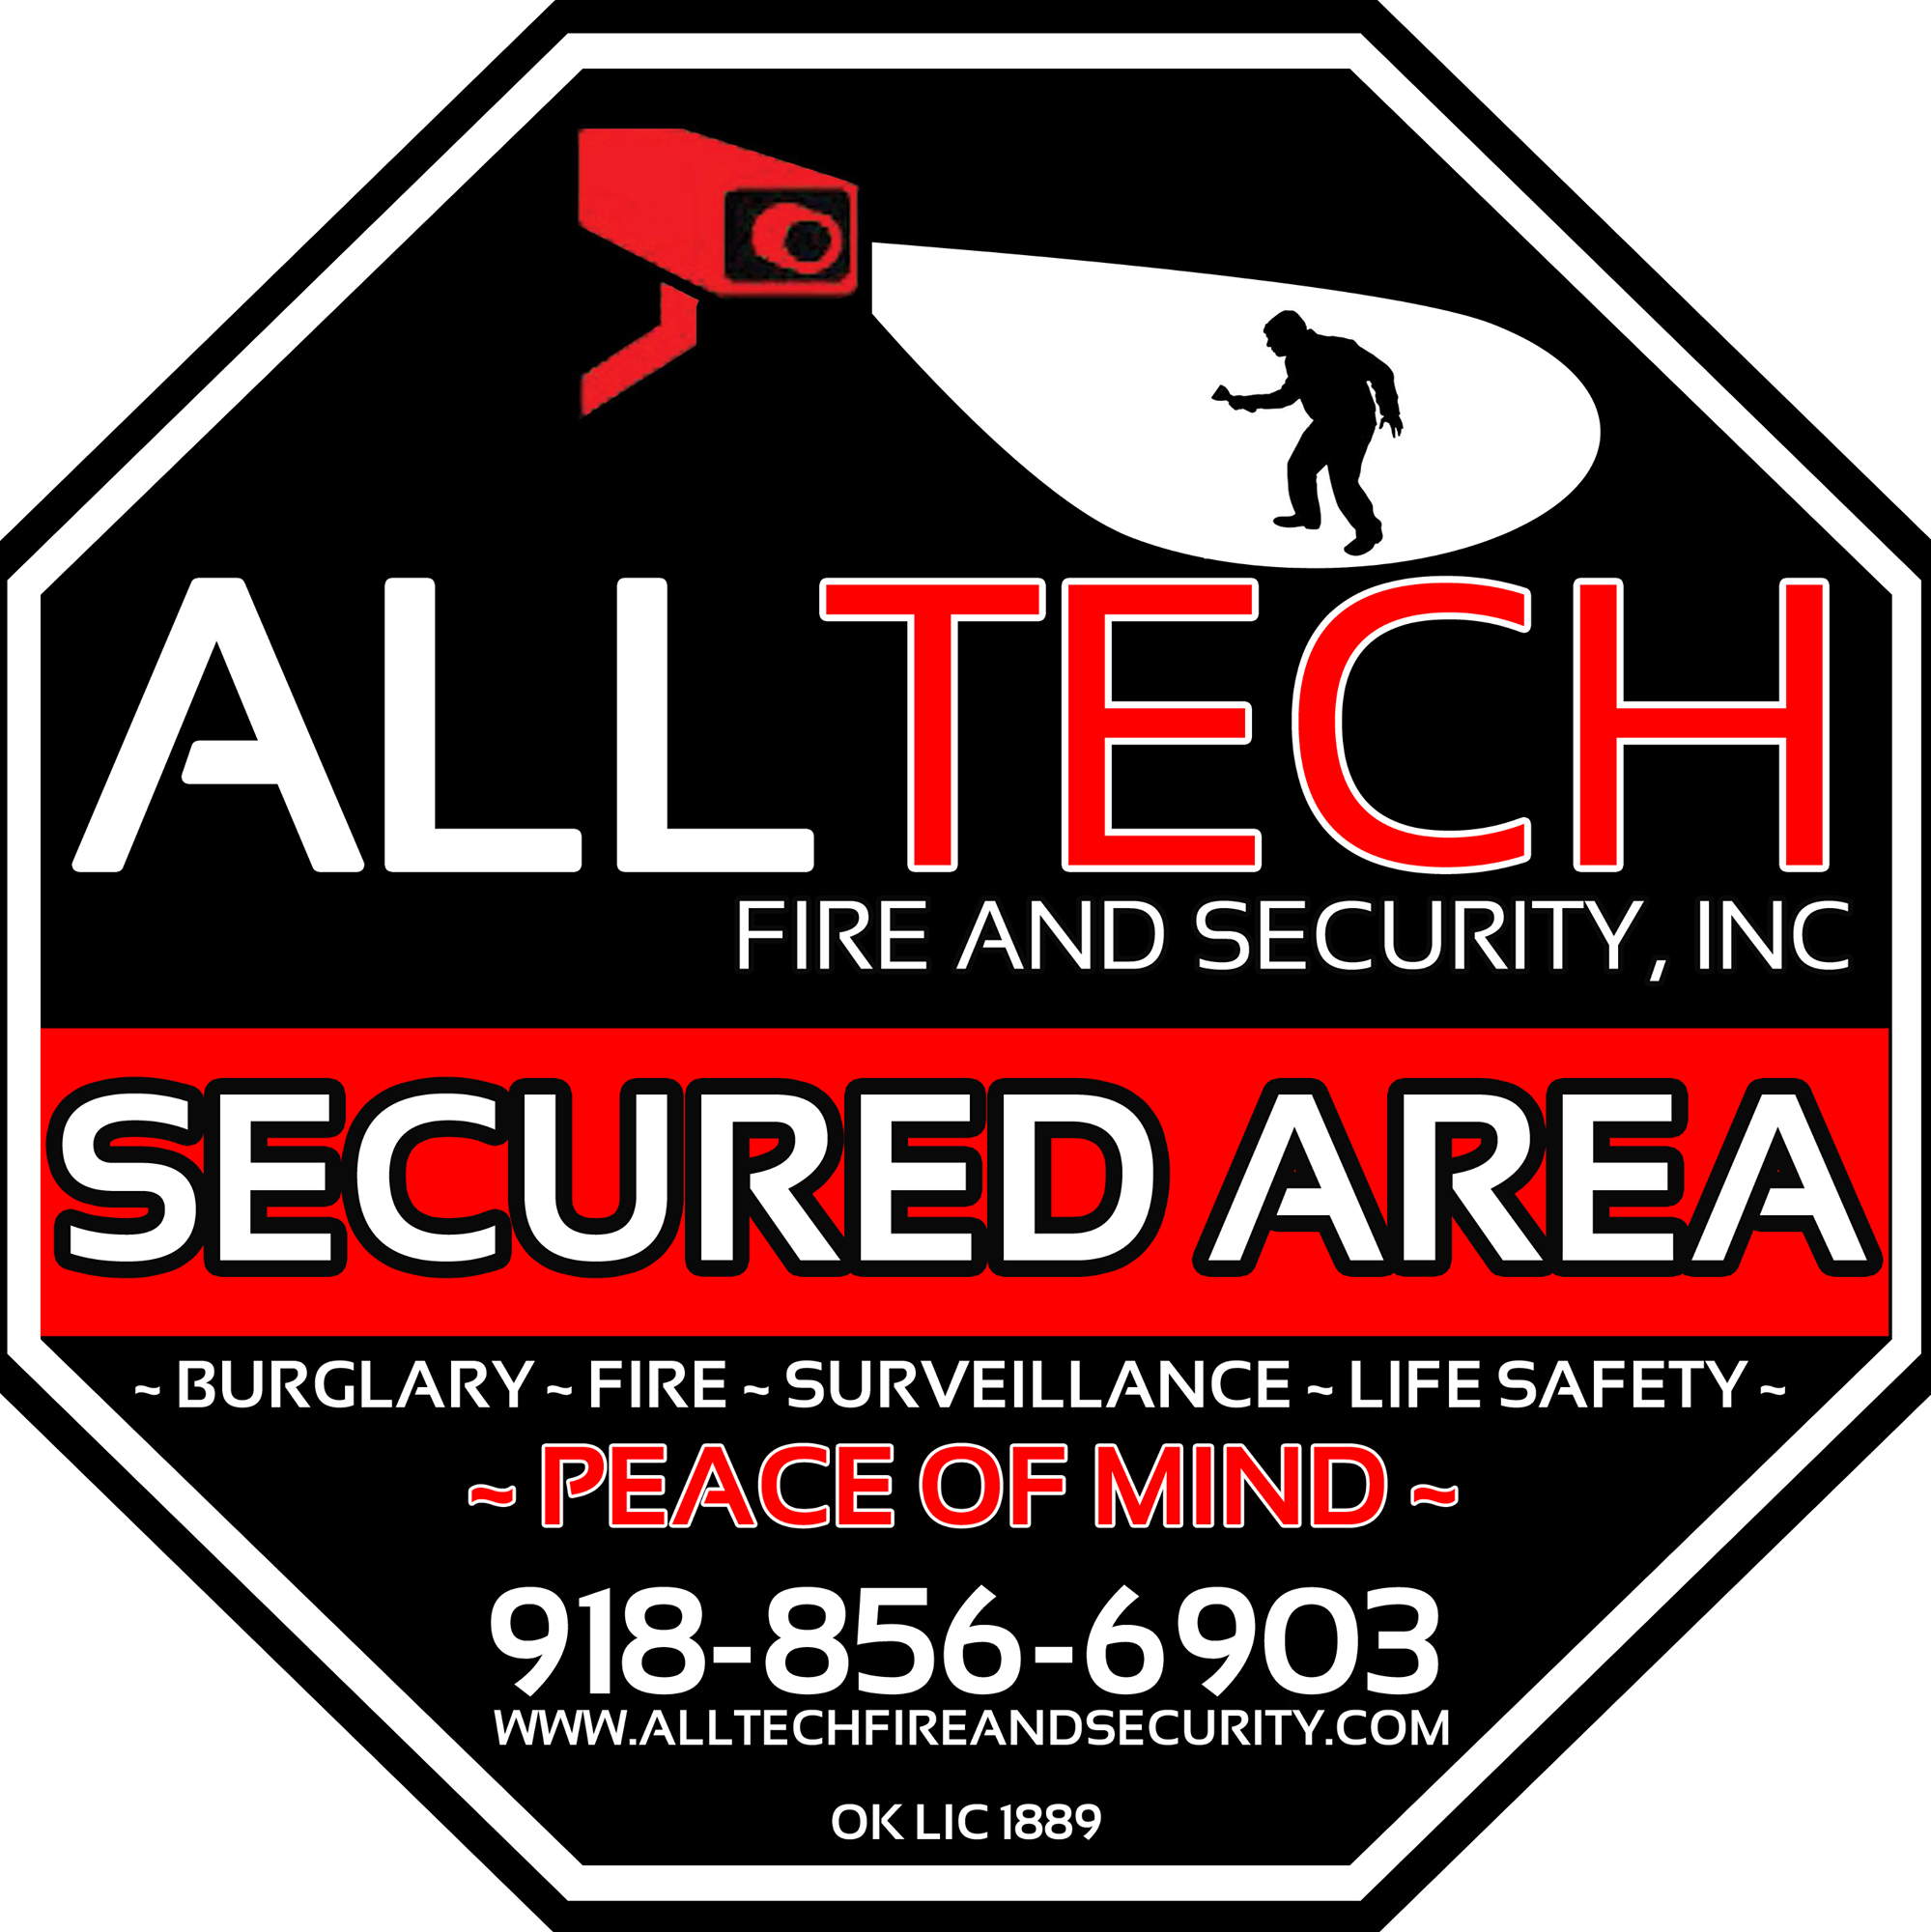 Alltech Fire and Security